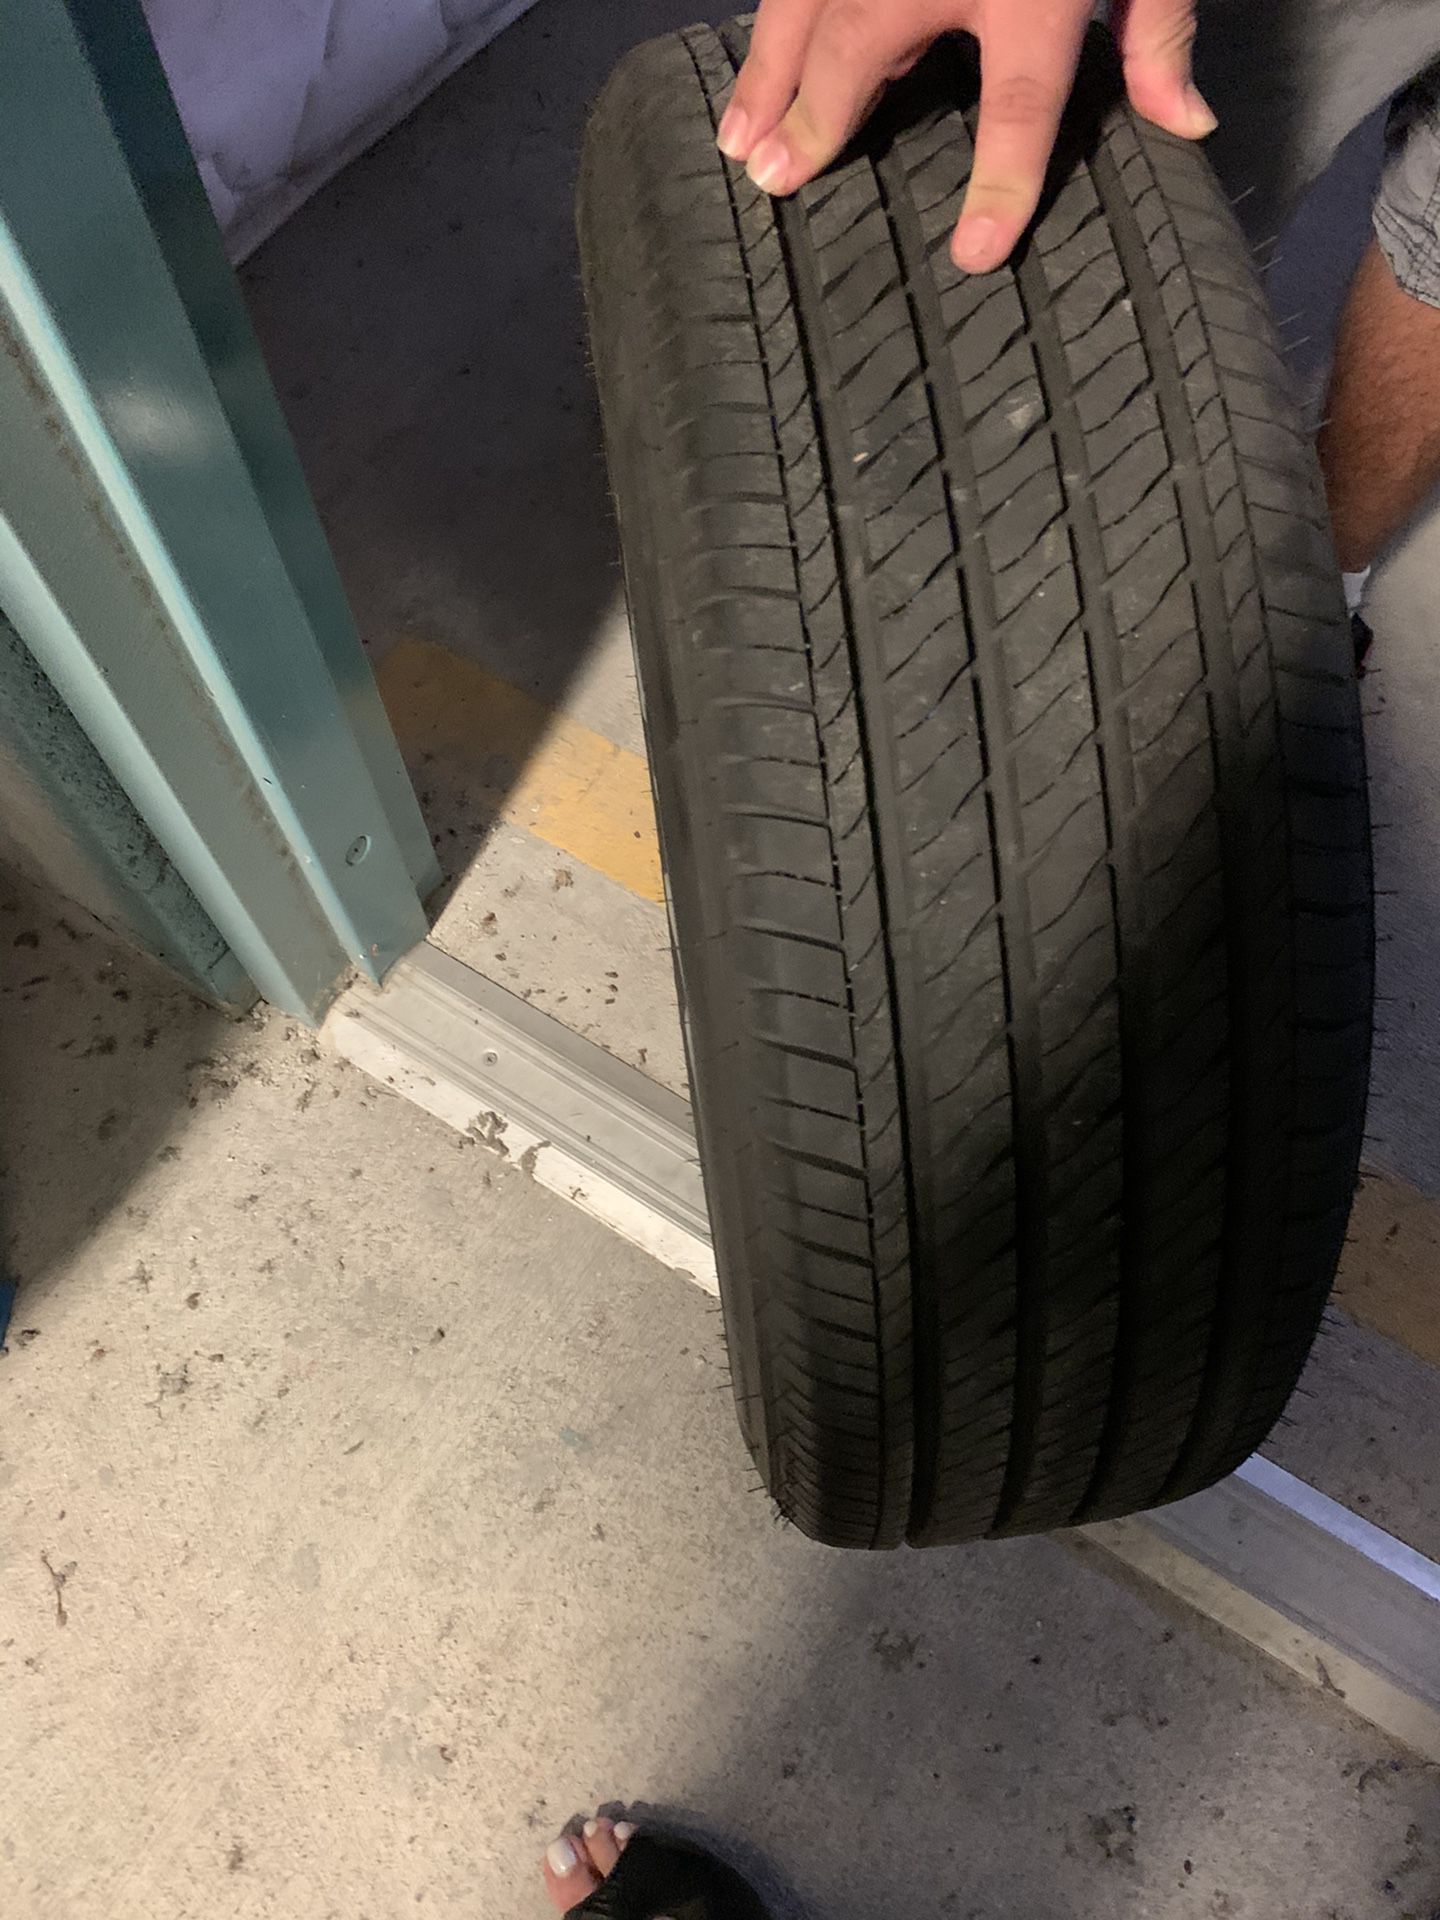 New Tires